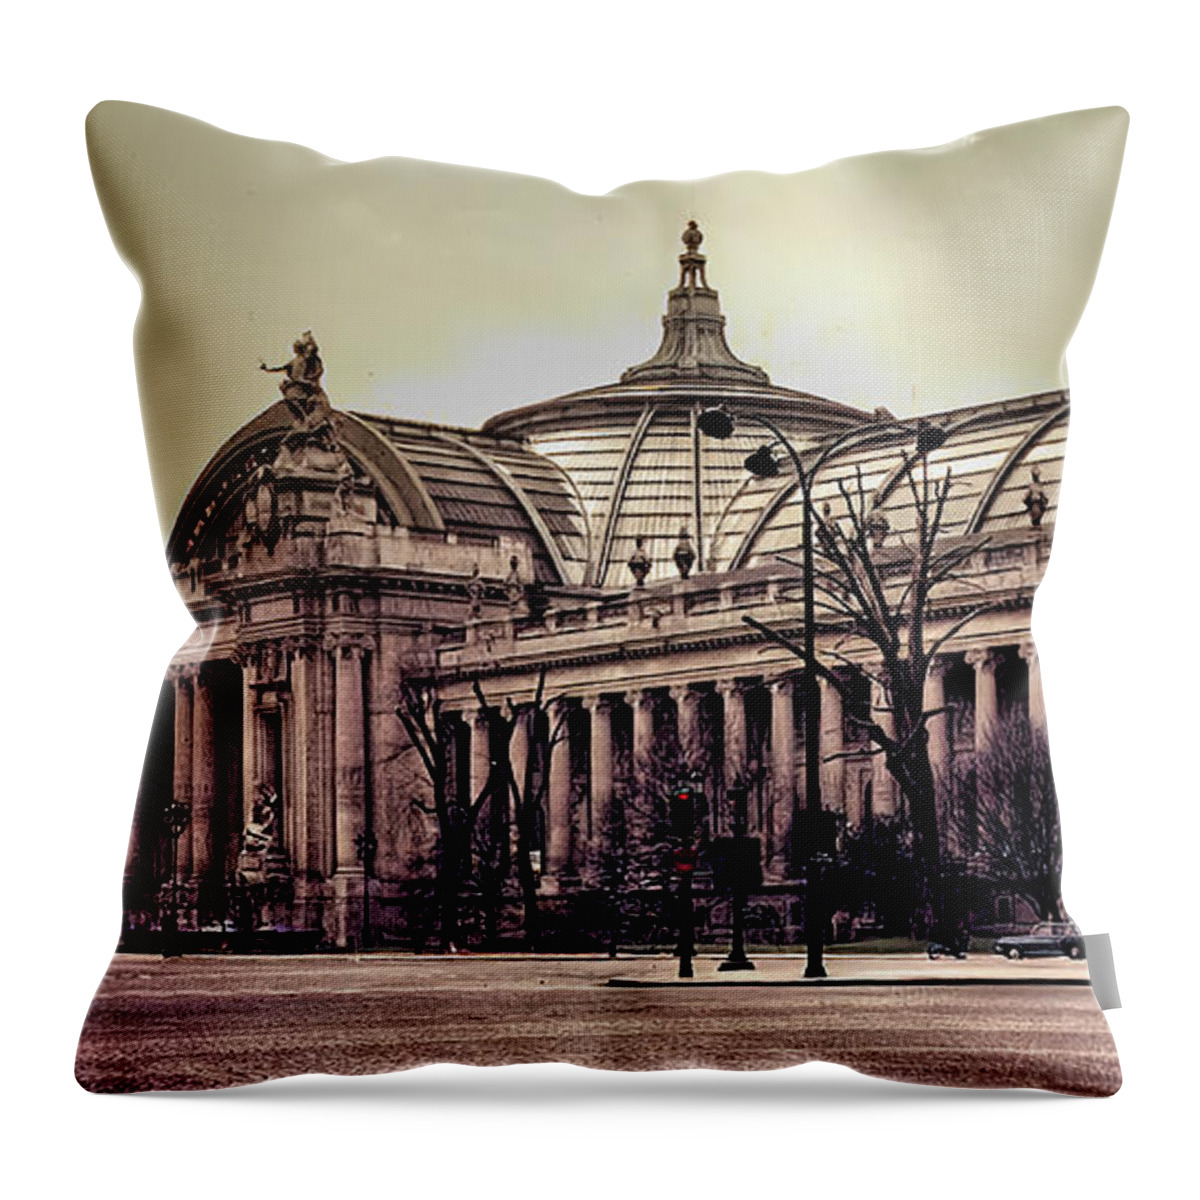 Museum Throw Pillow featuring the photograph Le Musee, Paris by Frank Lee